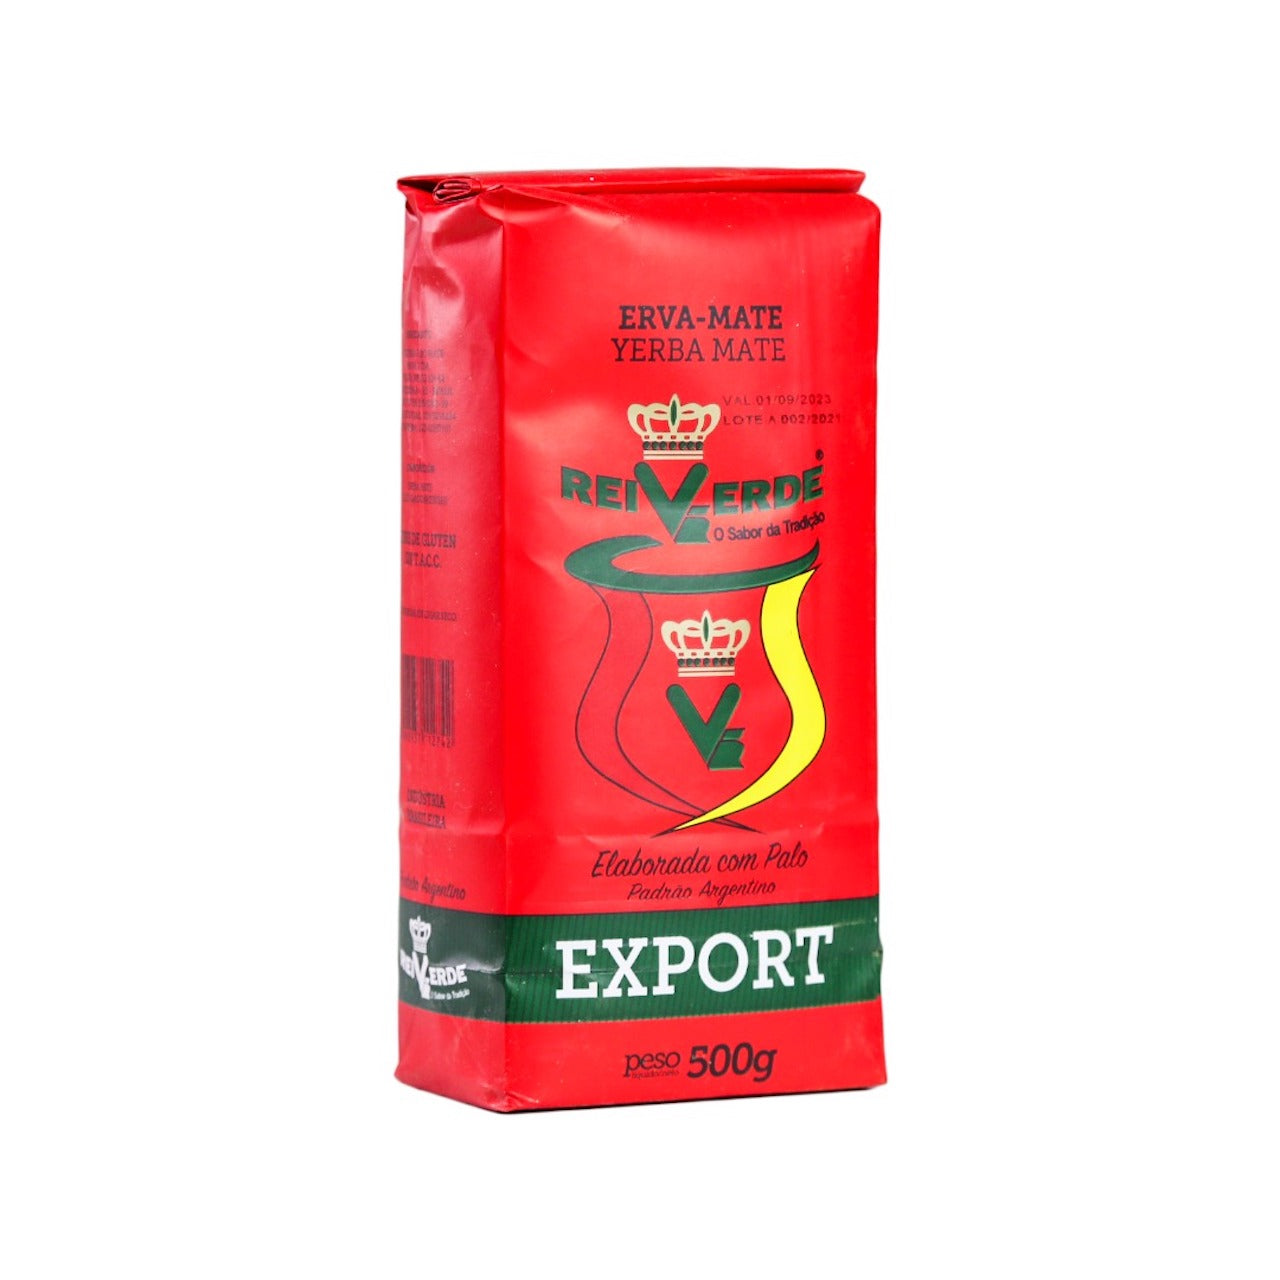 REI VERDE - Mate Argentine 500g - FINAL SALE - EXPIRED or CLOSE TO EXPIRY